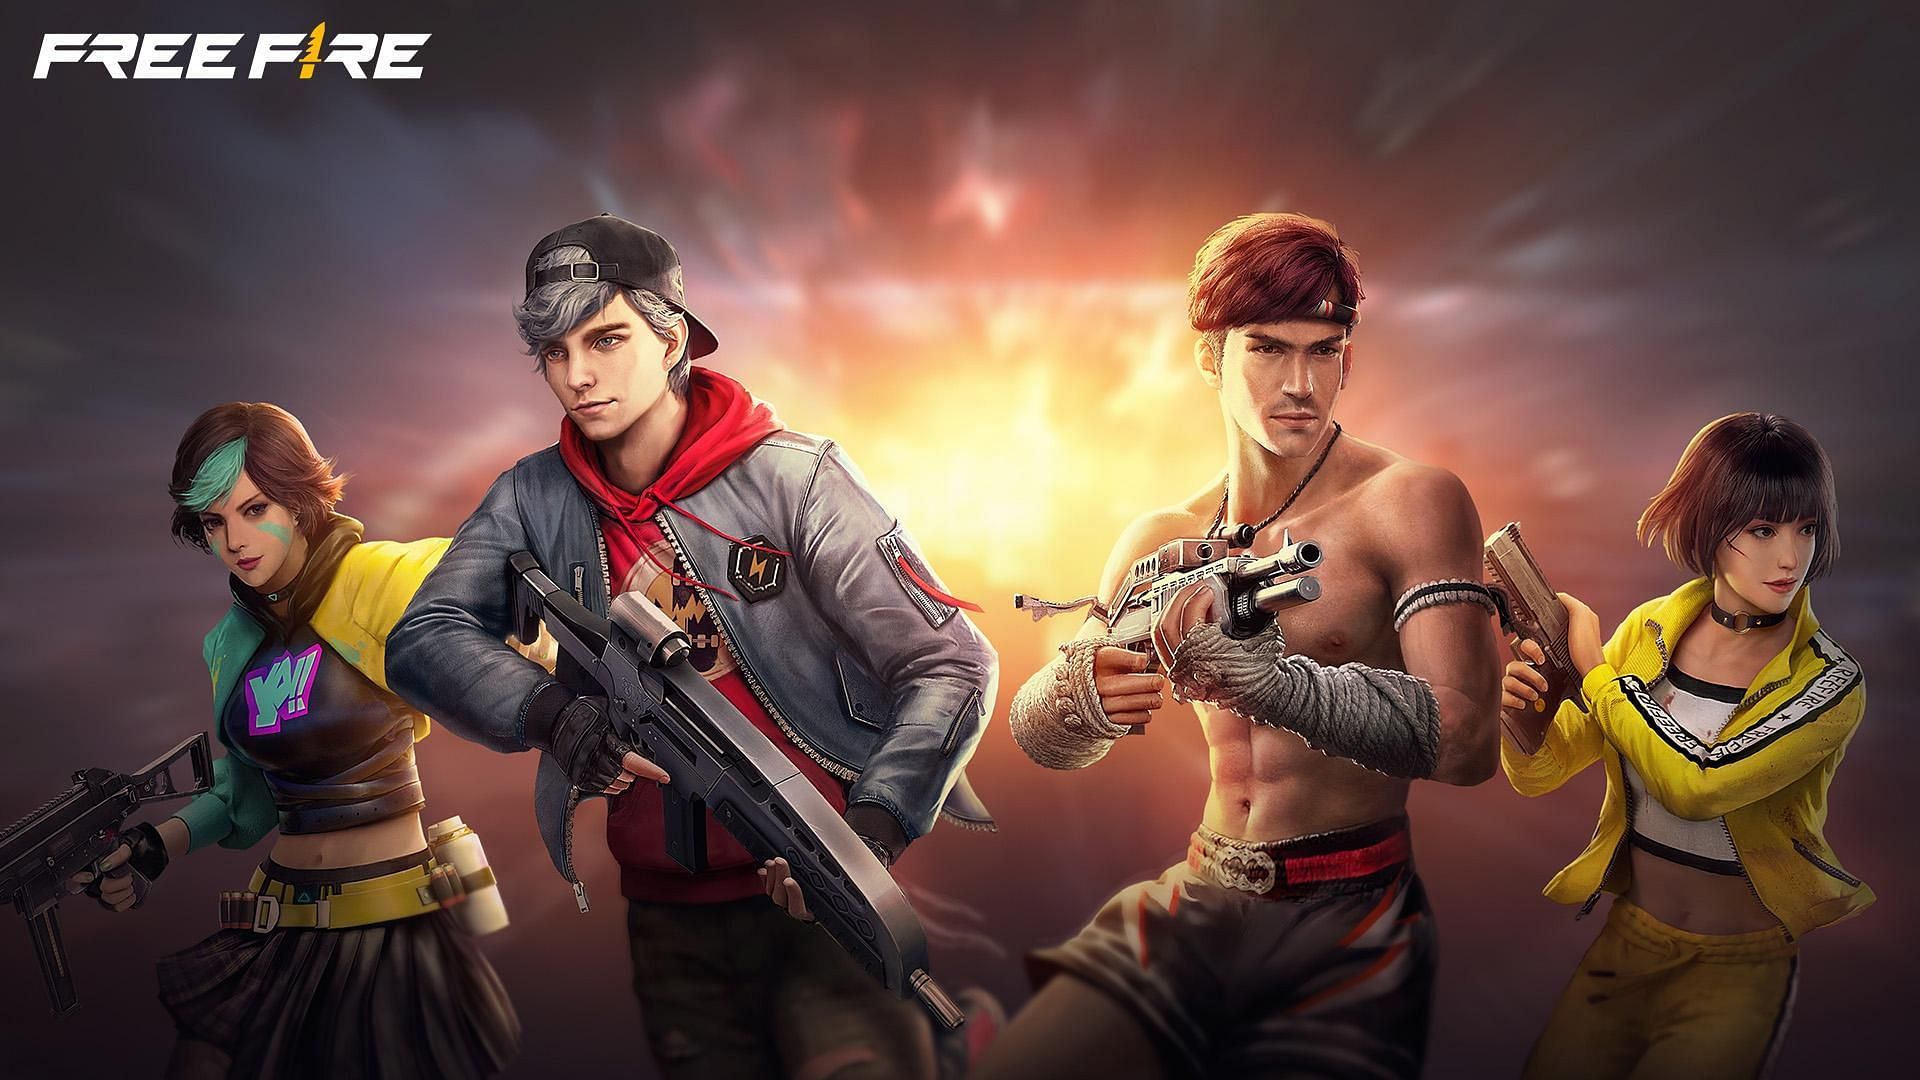 Make the most of Free Fire characters (Image via Garena)